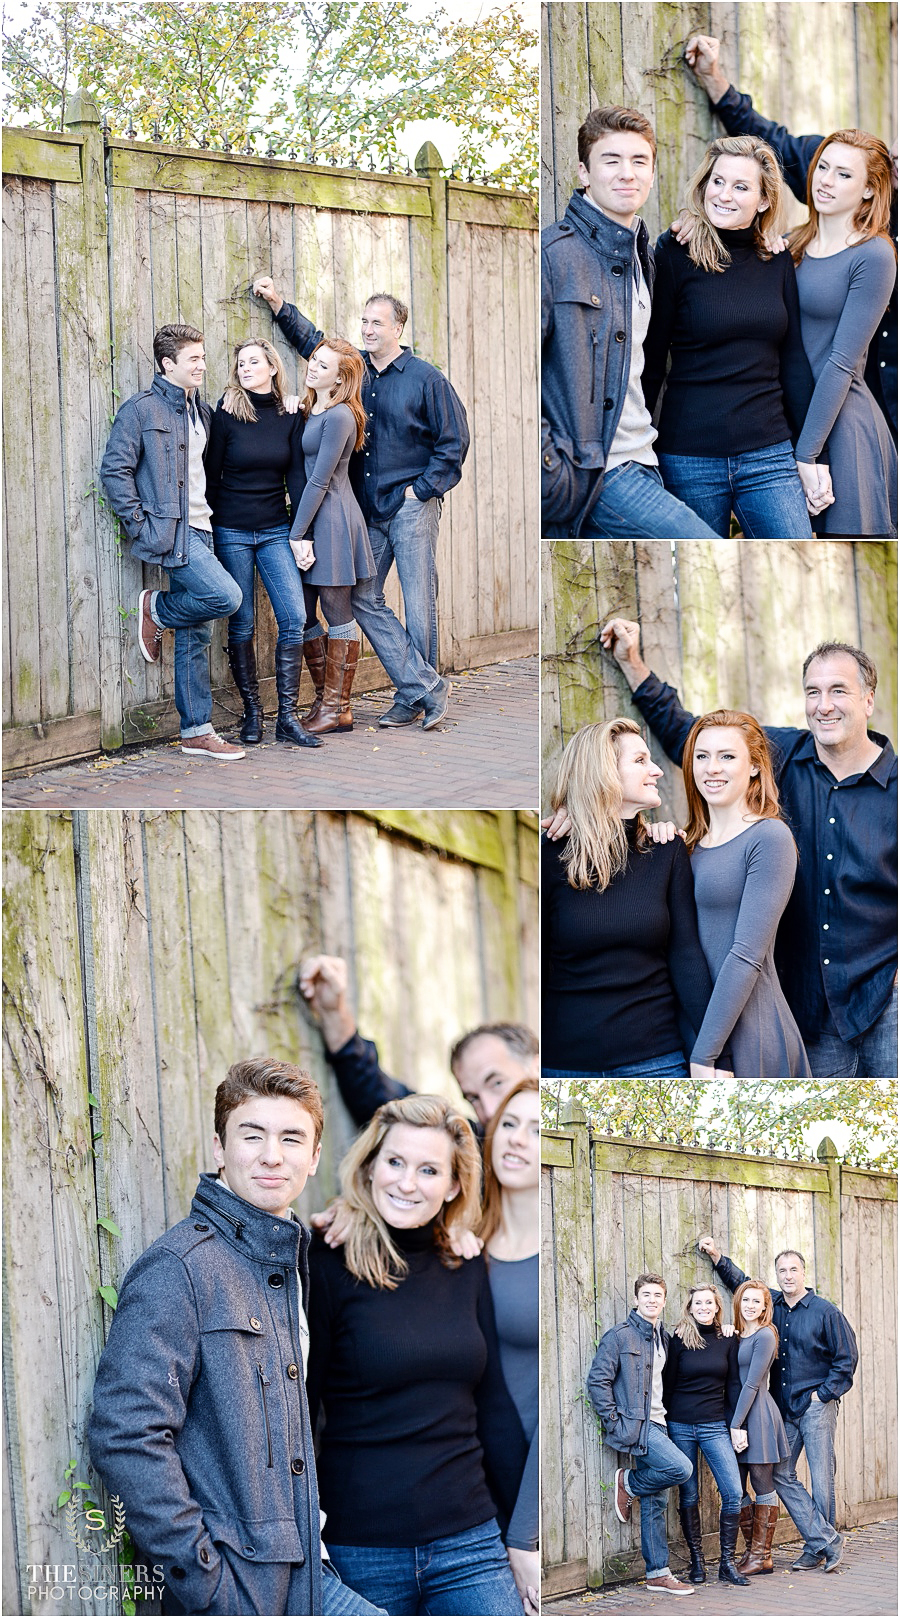 Hickey Family_Indianapolis Family Photographer_TheSinersPhotography_0023